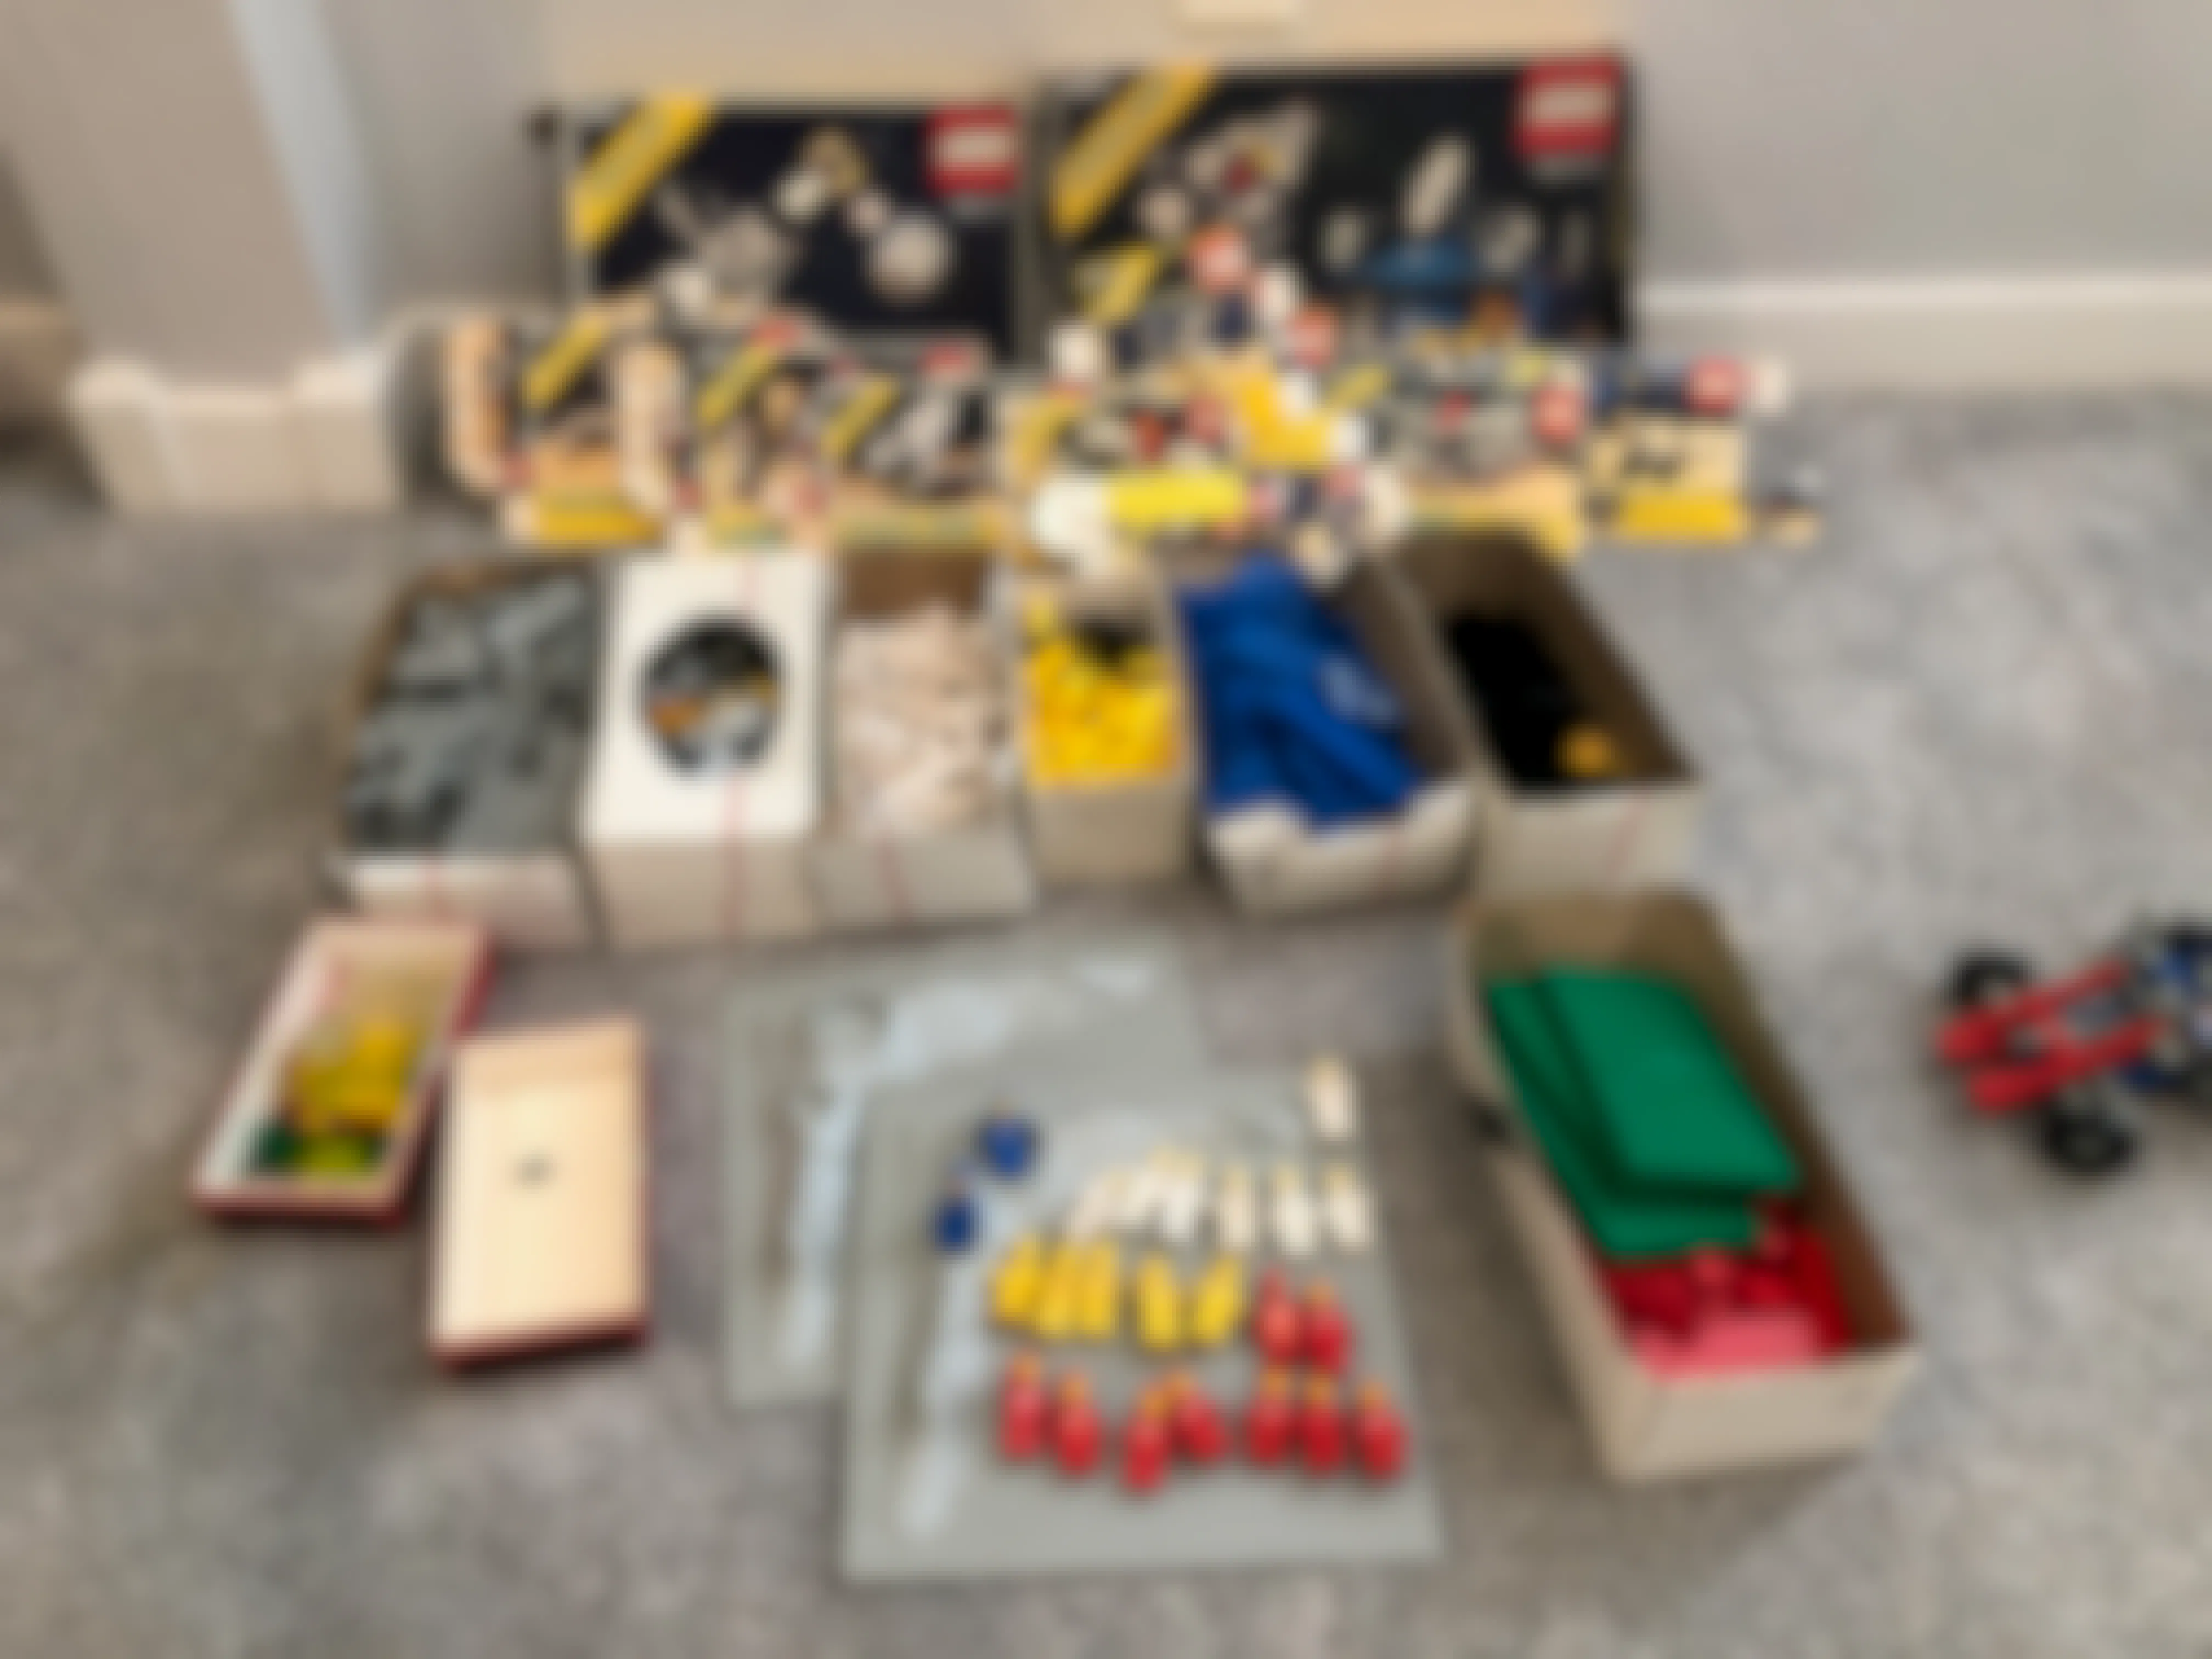 lego sets laid out on the floor